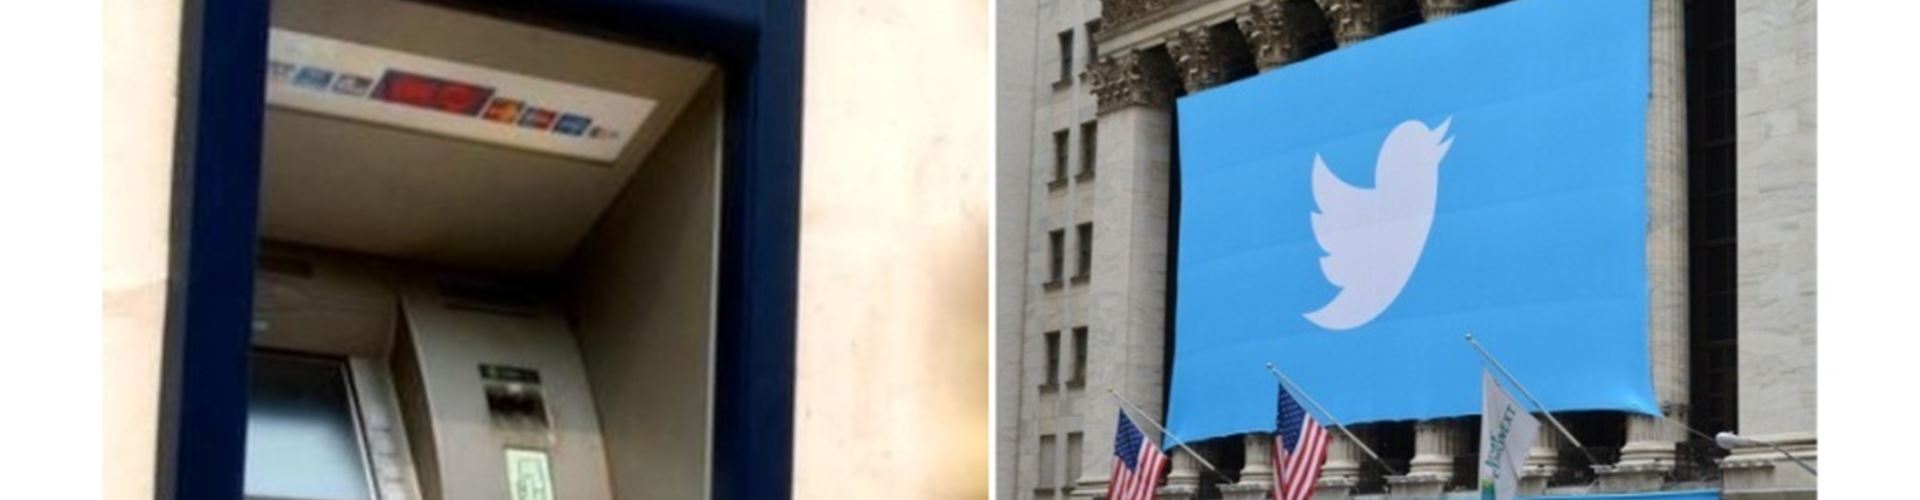 Now you can send money via Twitter with Barclays app